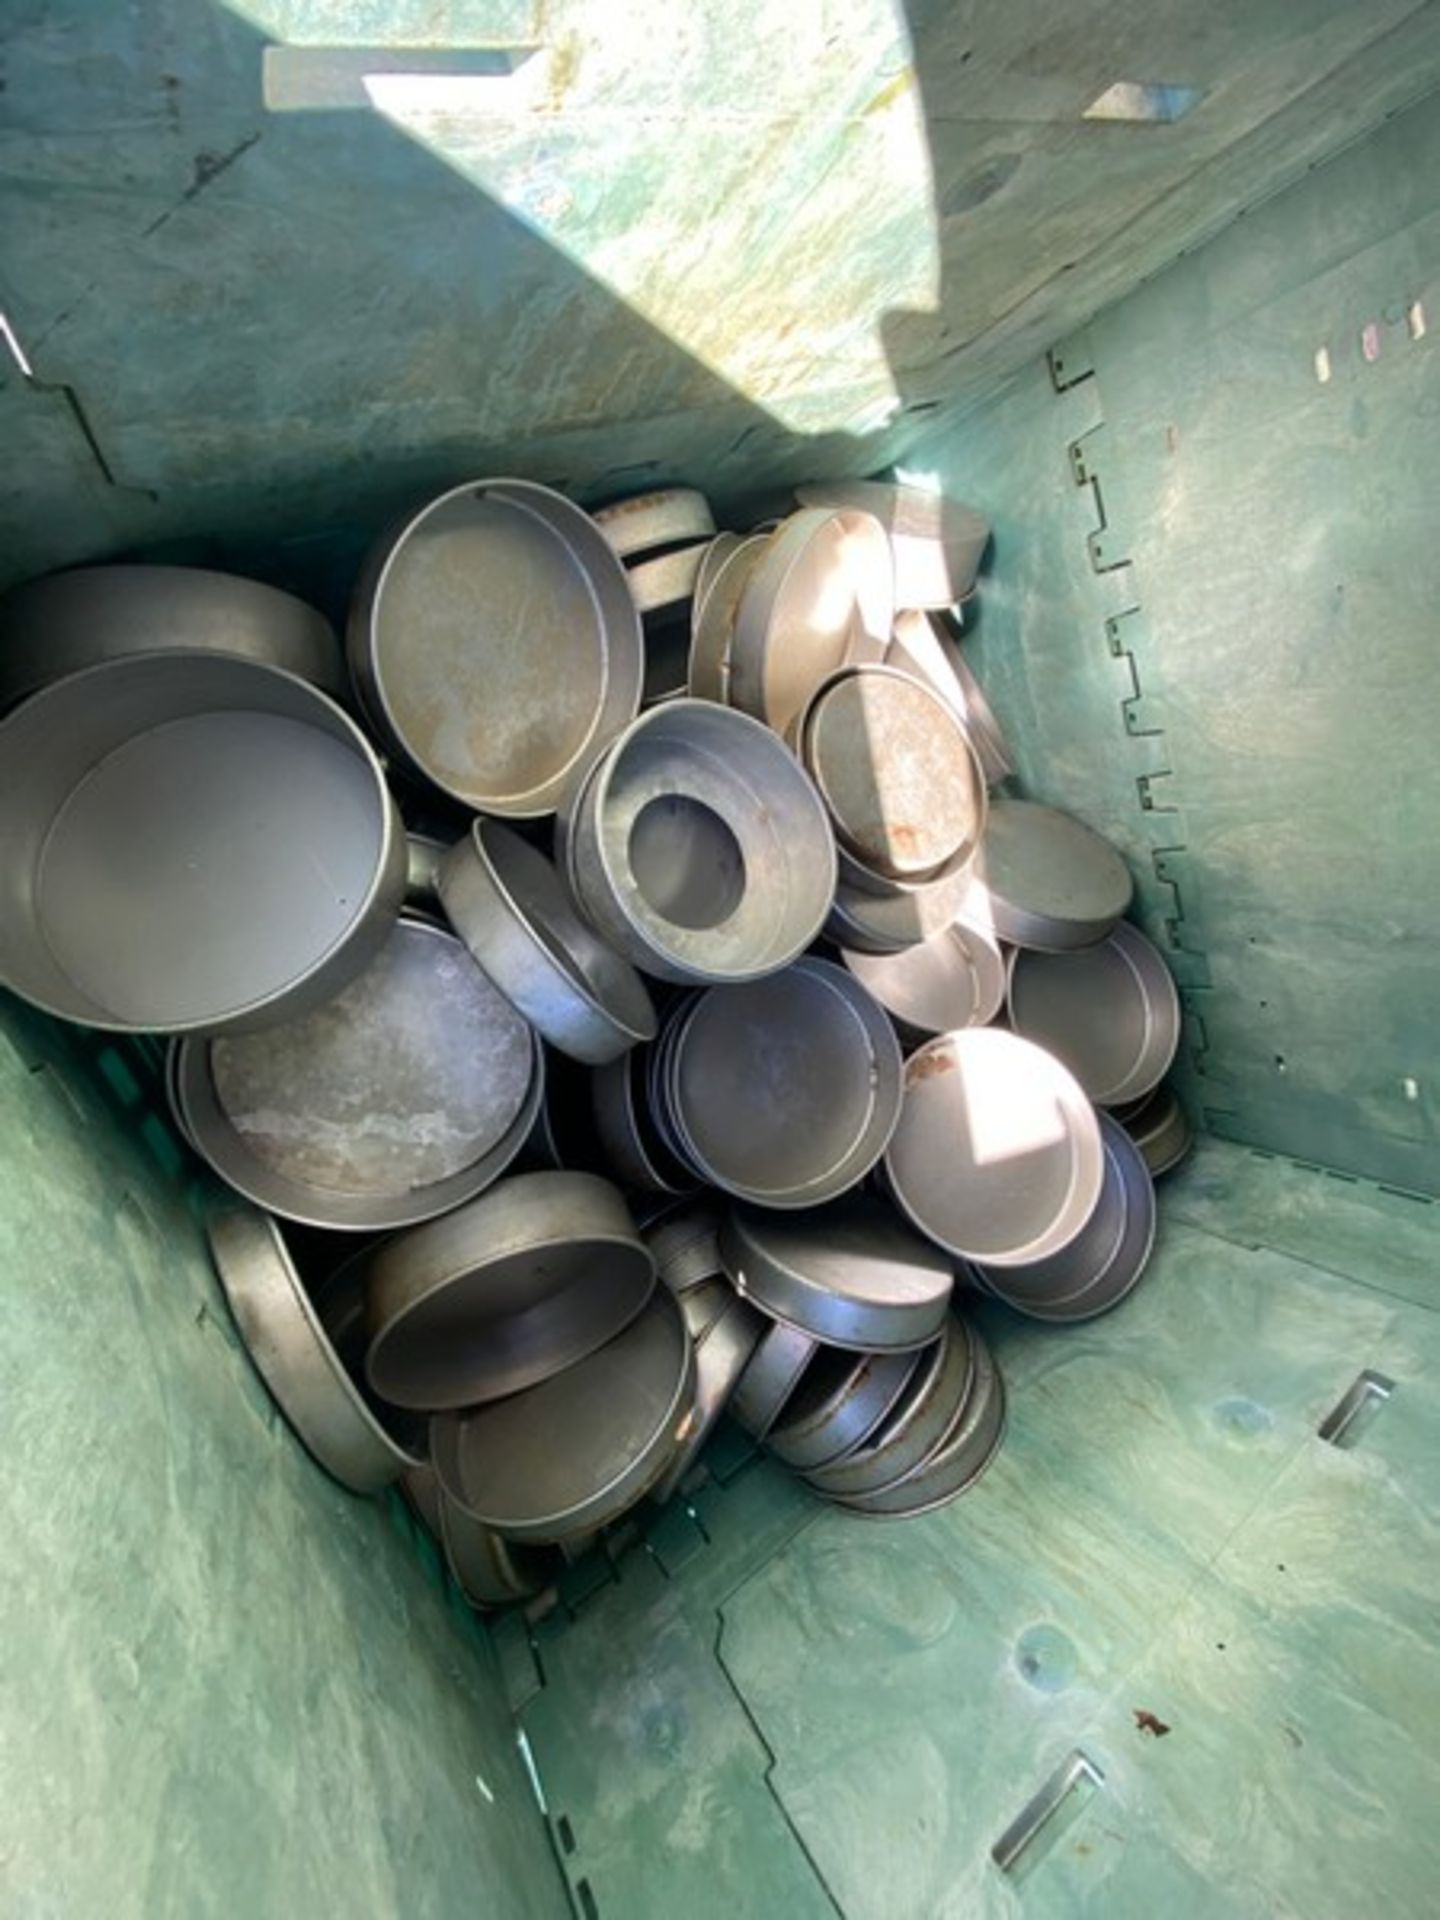 Lot of Assorted 10” Round Aluminum Pans,Aprox. (75) Pans with Aprox. 48” L x 45” W x 49” H Plastic - Image 2 of 3